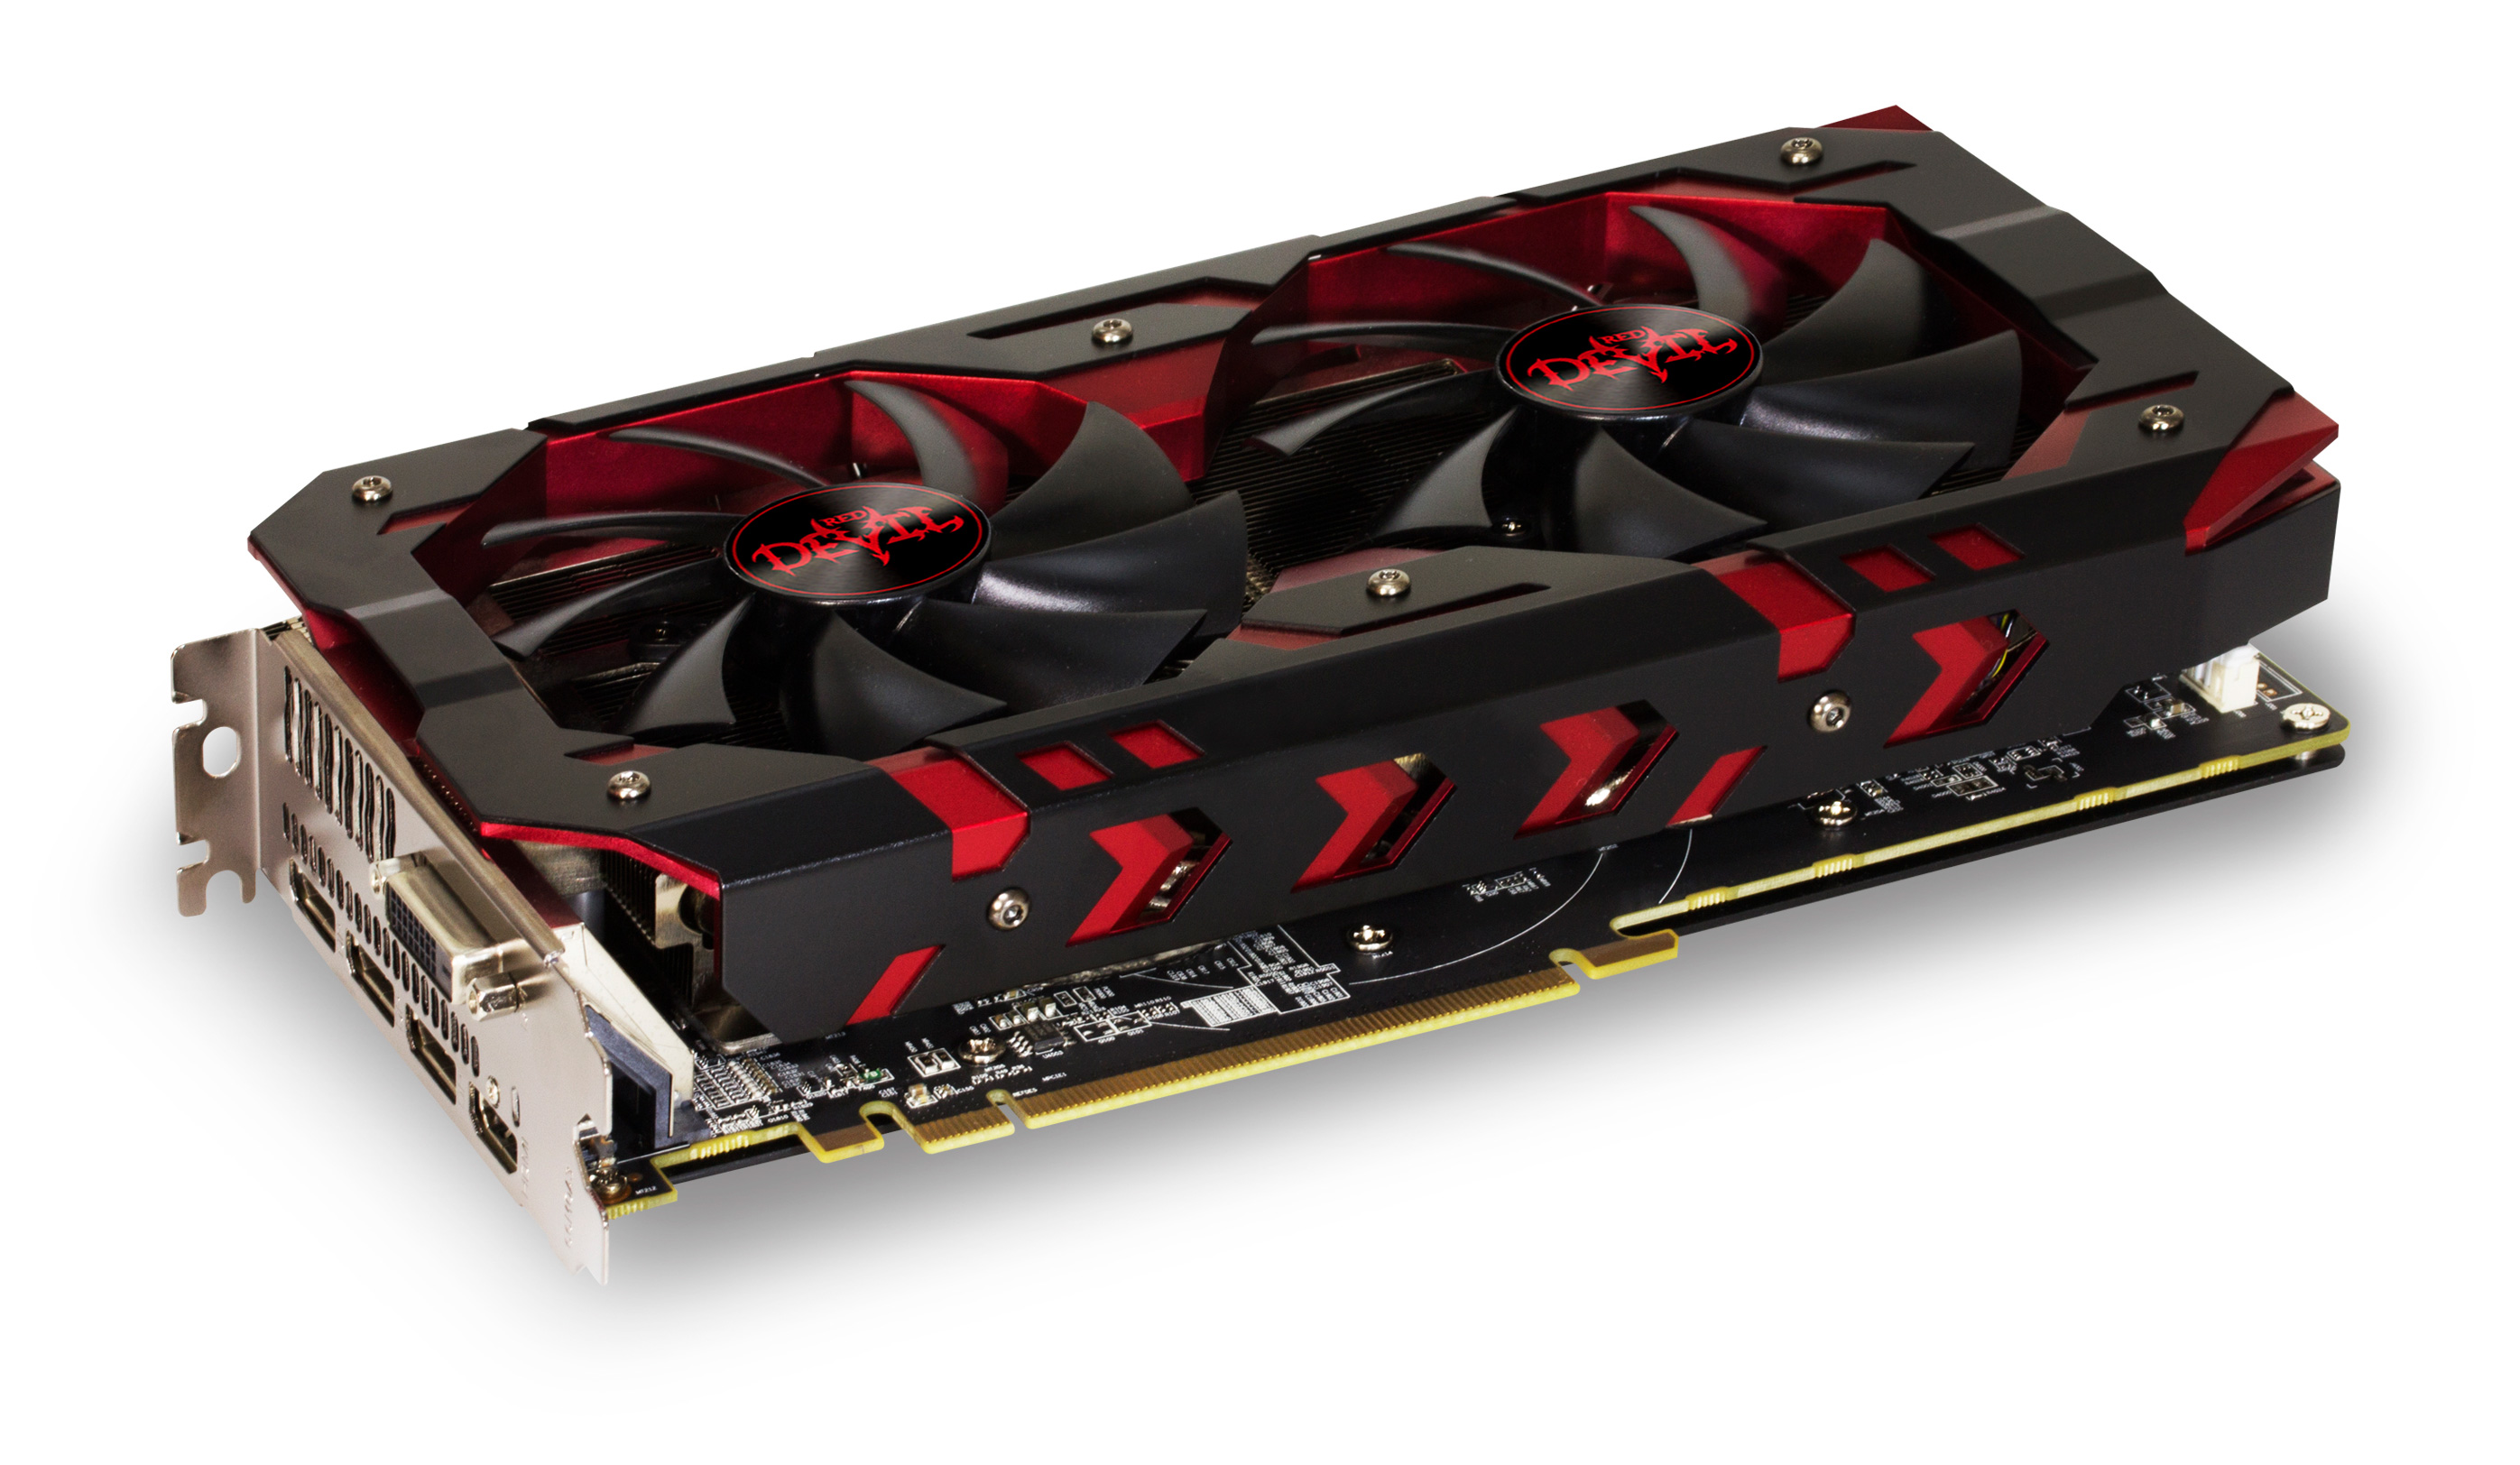 Meet the Cards PowerColor Red Devil RX 580 & Sapphire Nitro+ RX 570